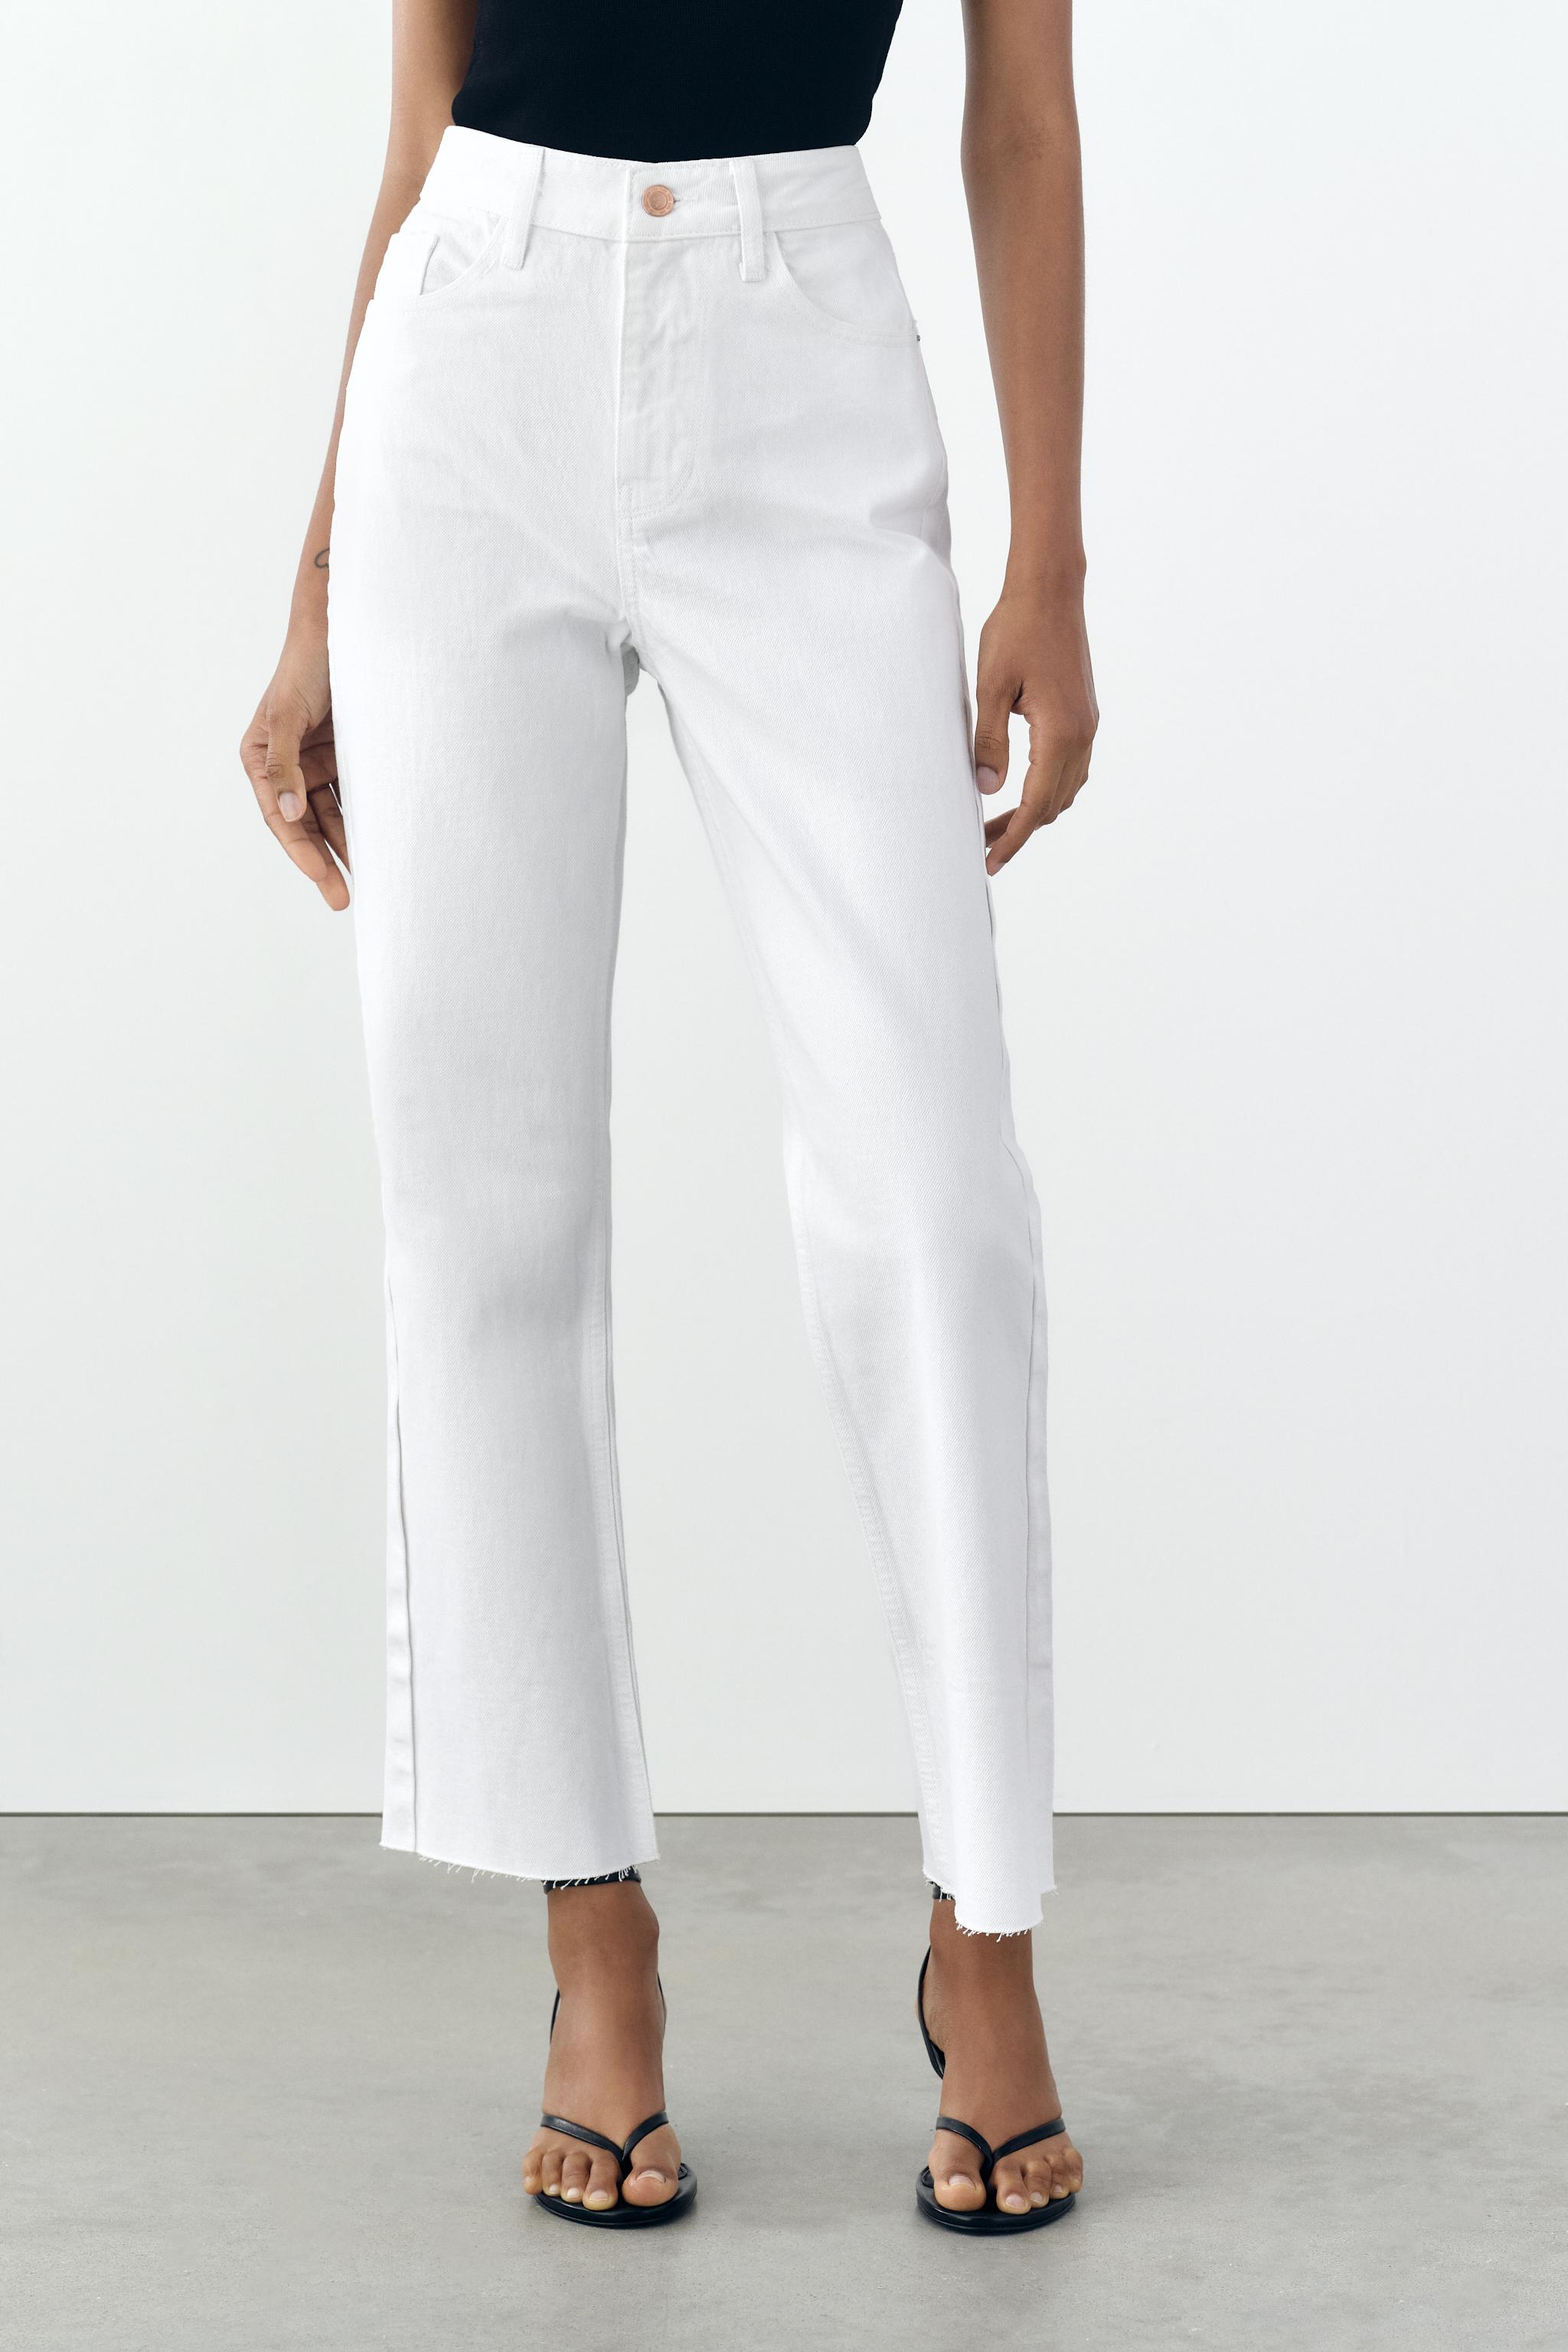 Women's Jeans | Explore our New Arrivals | ZARA United States